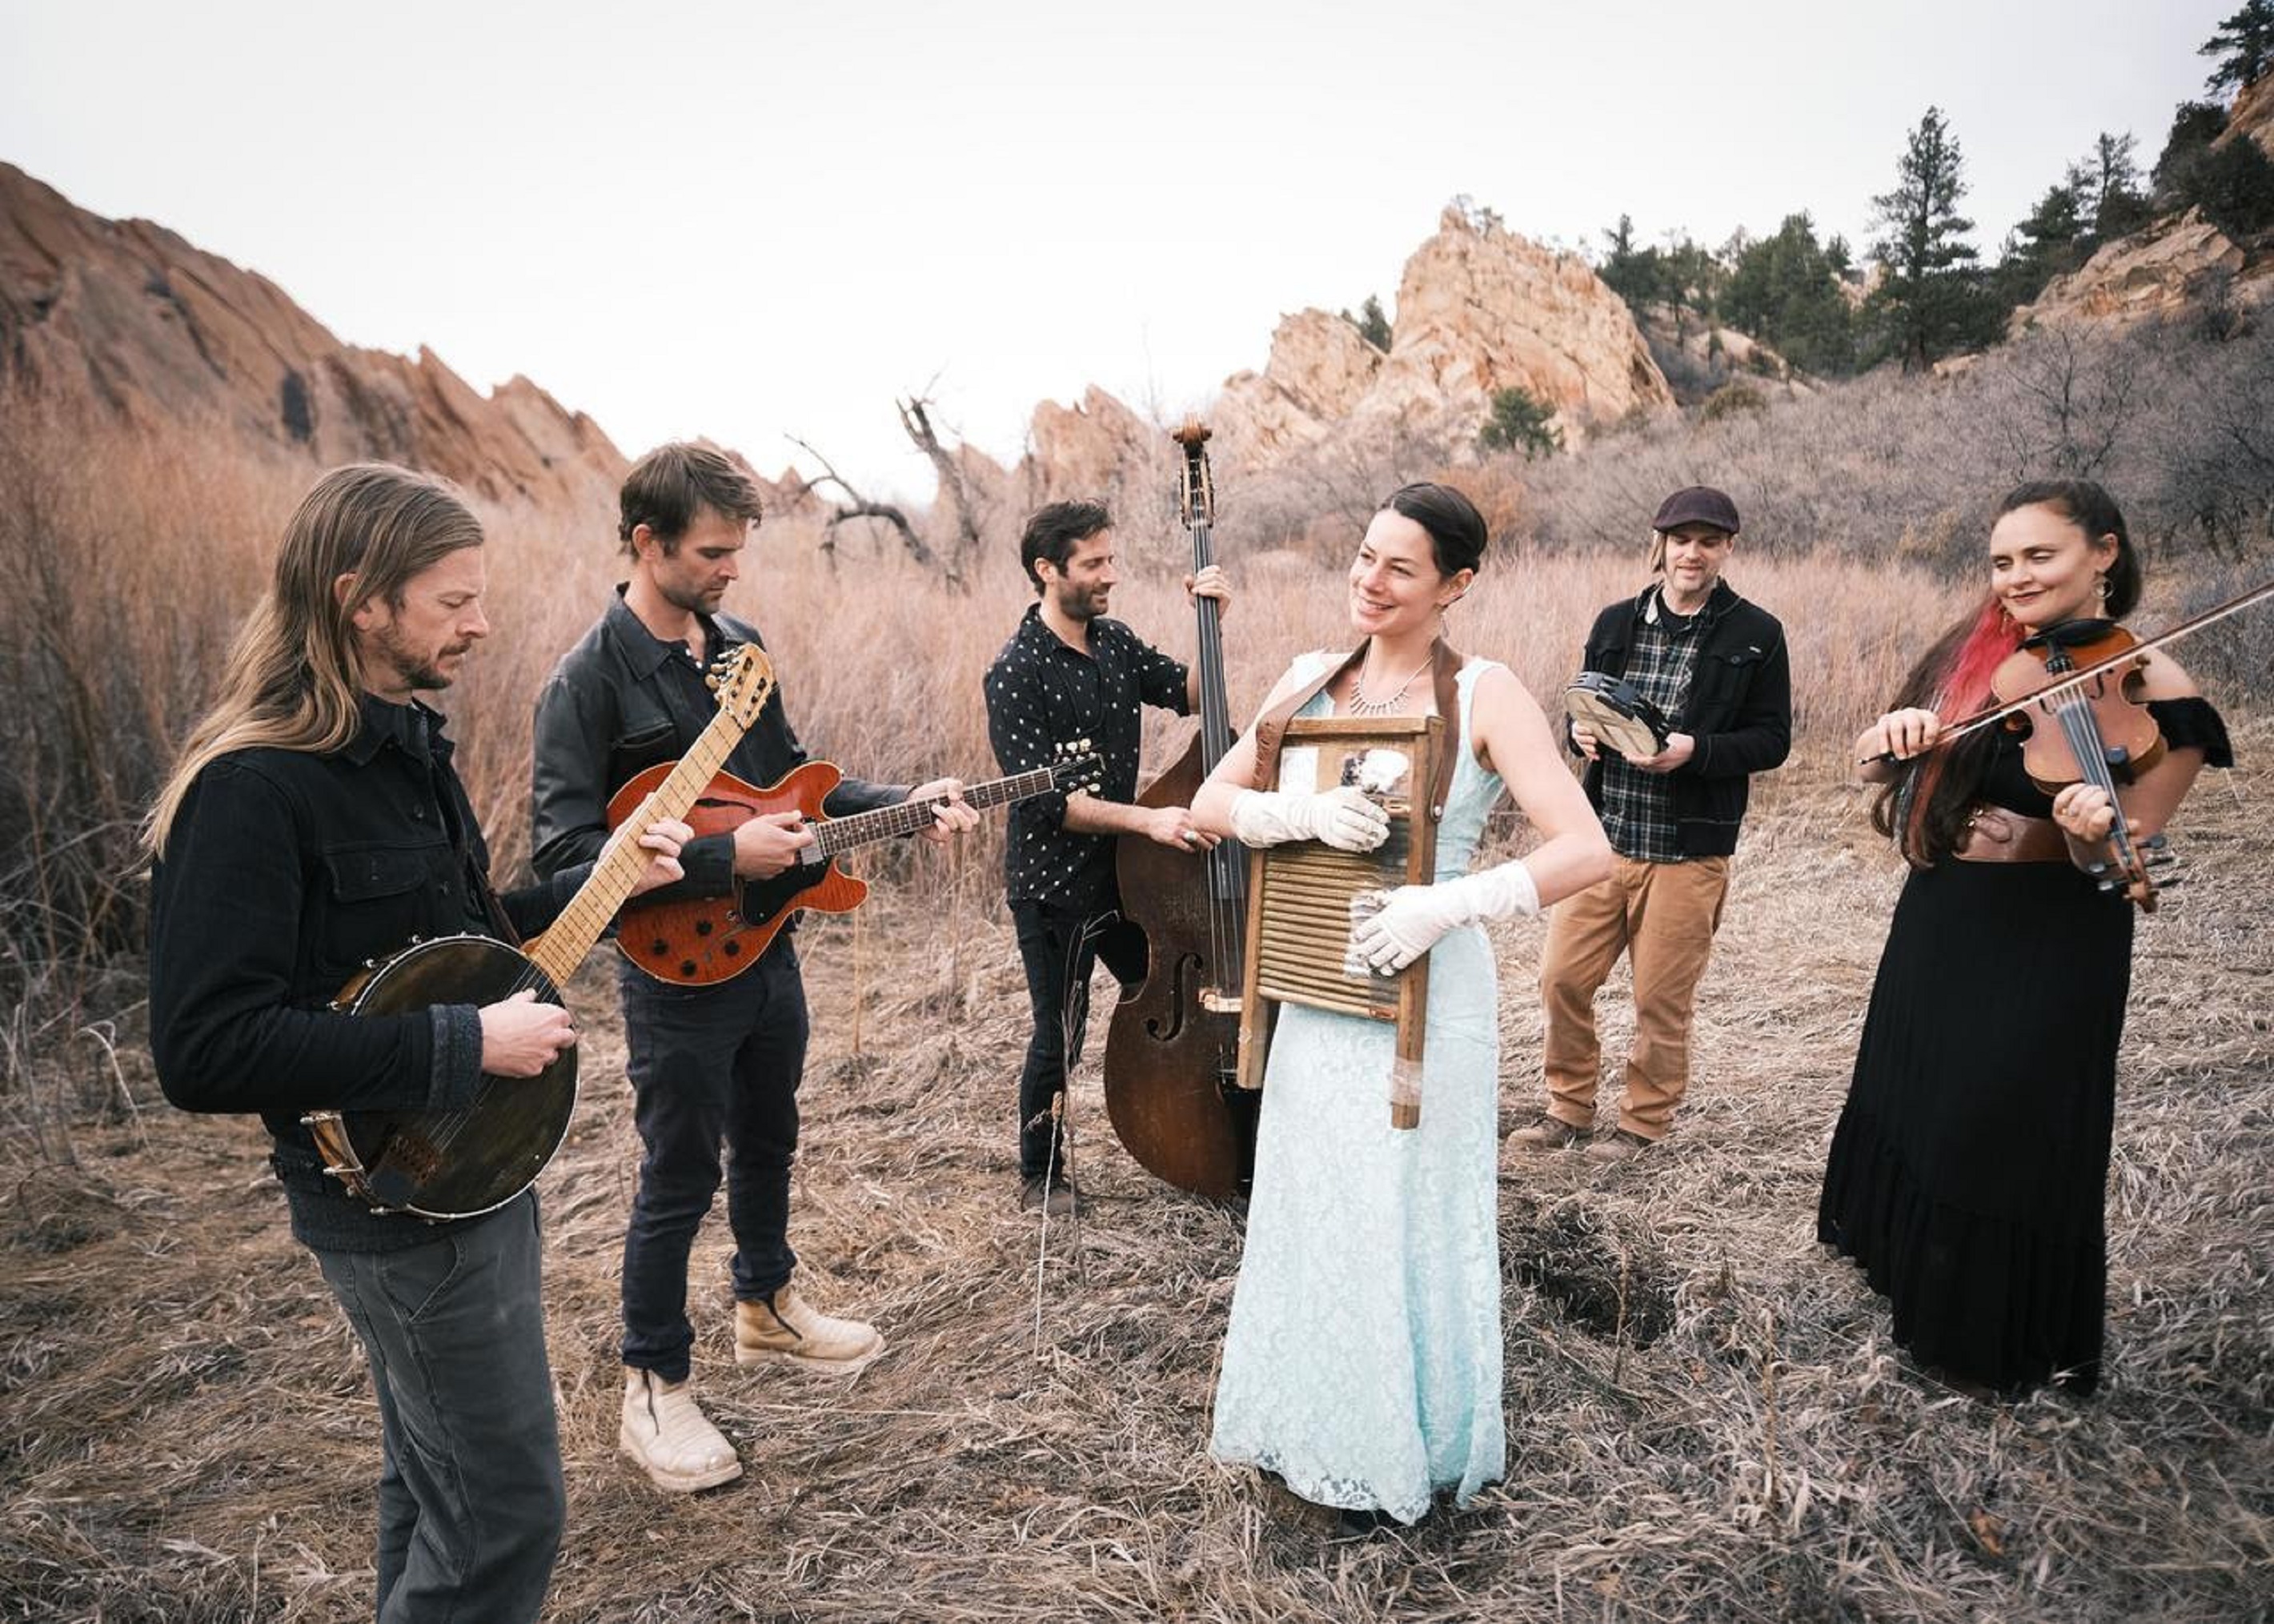 Elephant Revival Returns to Planet Bluegrass in Lyons August 19 for a Special Hometown Performance